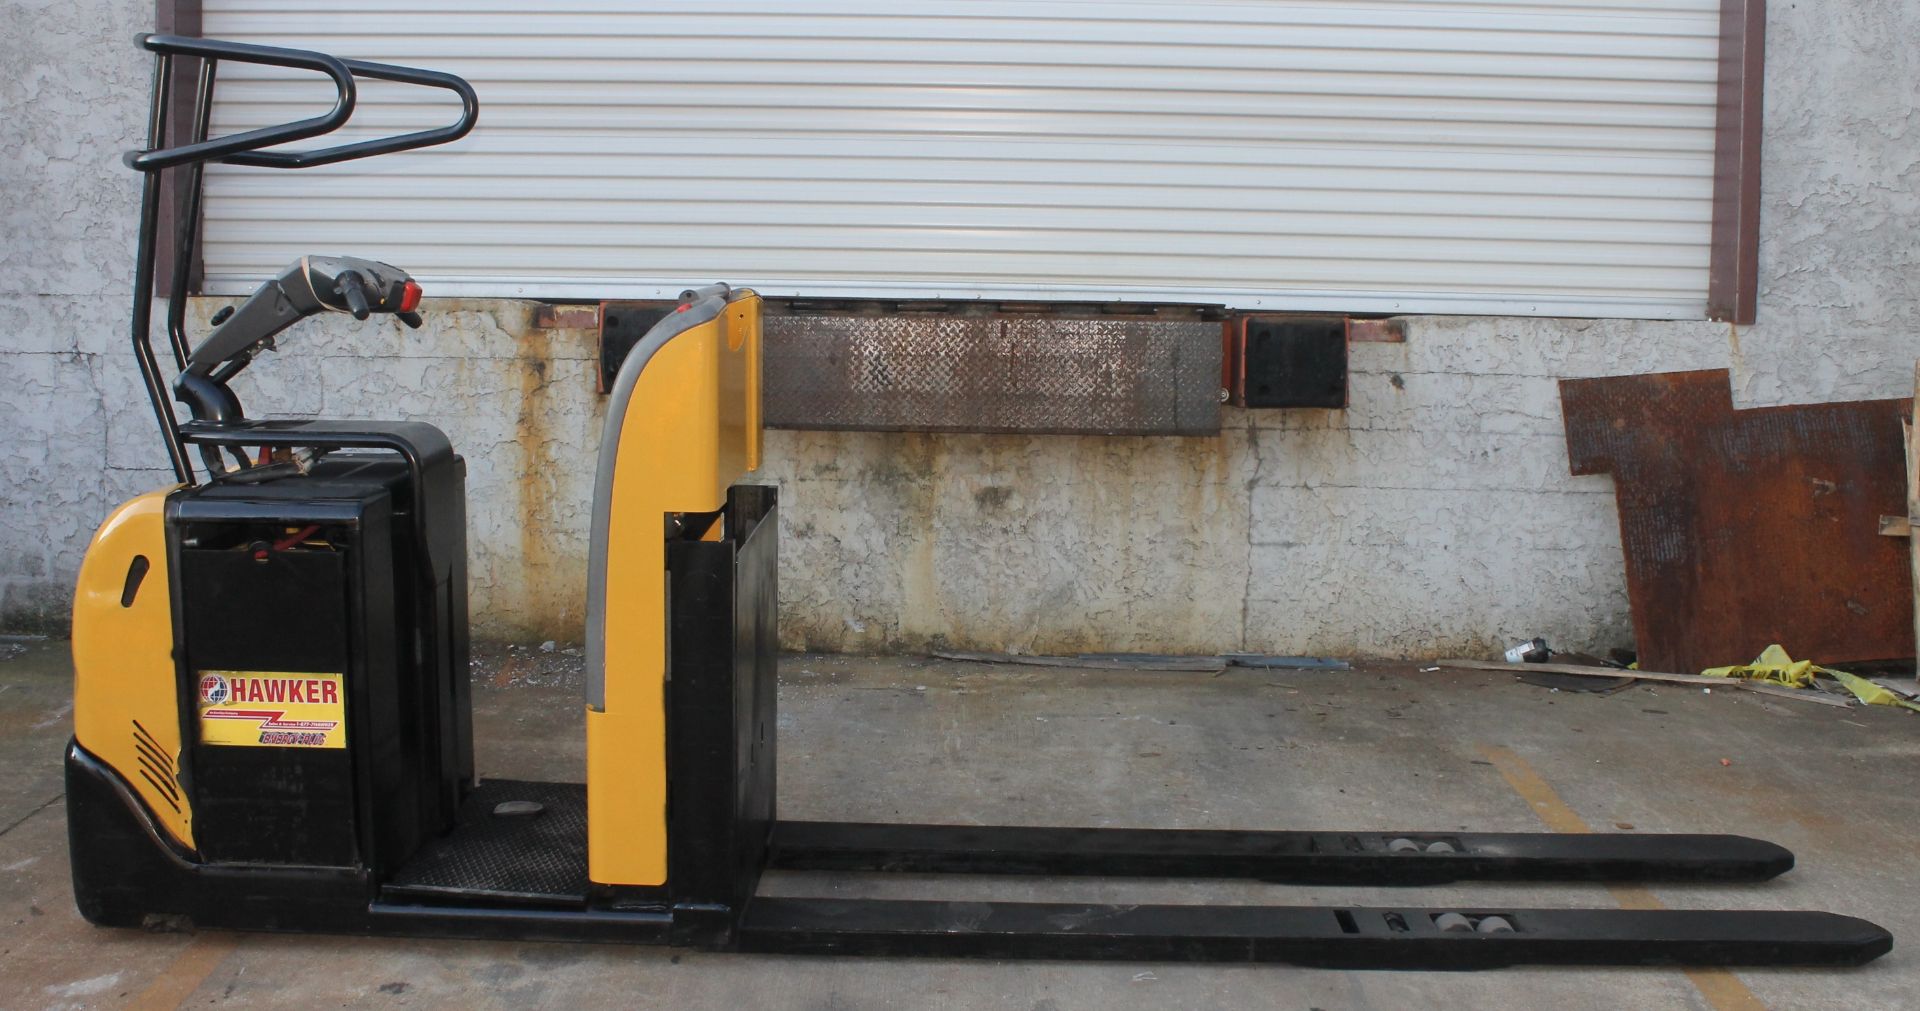 2009 ATLET TEMPO PPD DRIVER LIFT LOW LEVEL ORDER PICKER WITH 24 VOLTS CHARGER, - Image 3 of 10